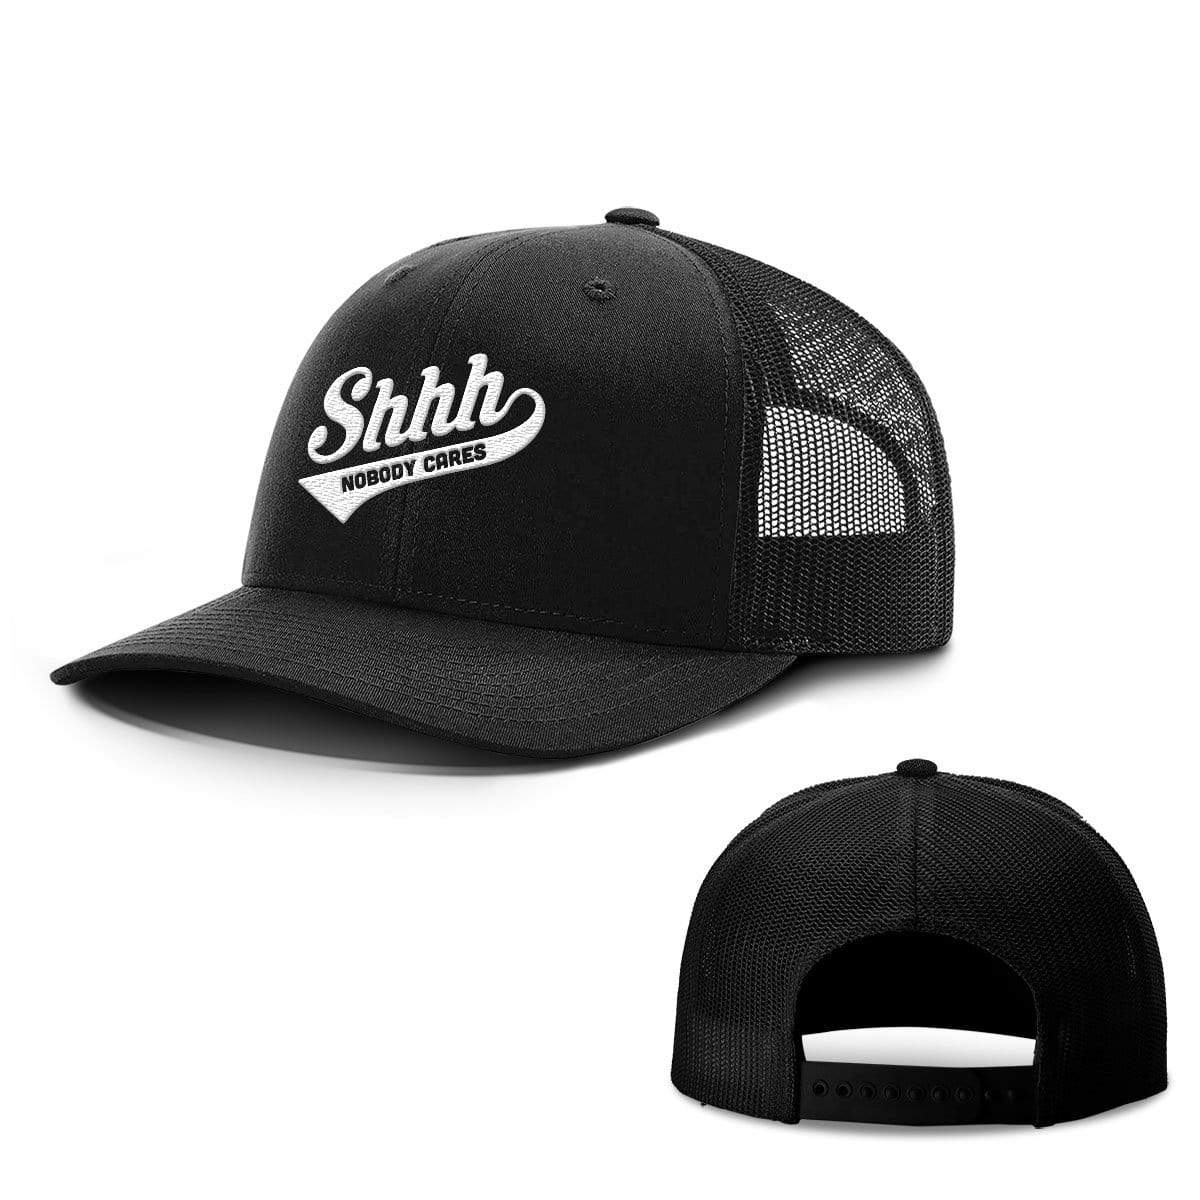 BustedTees.com Snapback / Full Black / One Size Shh Nobody Cares Hats